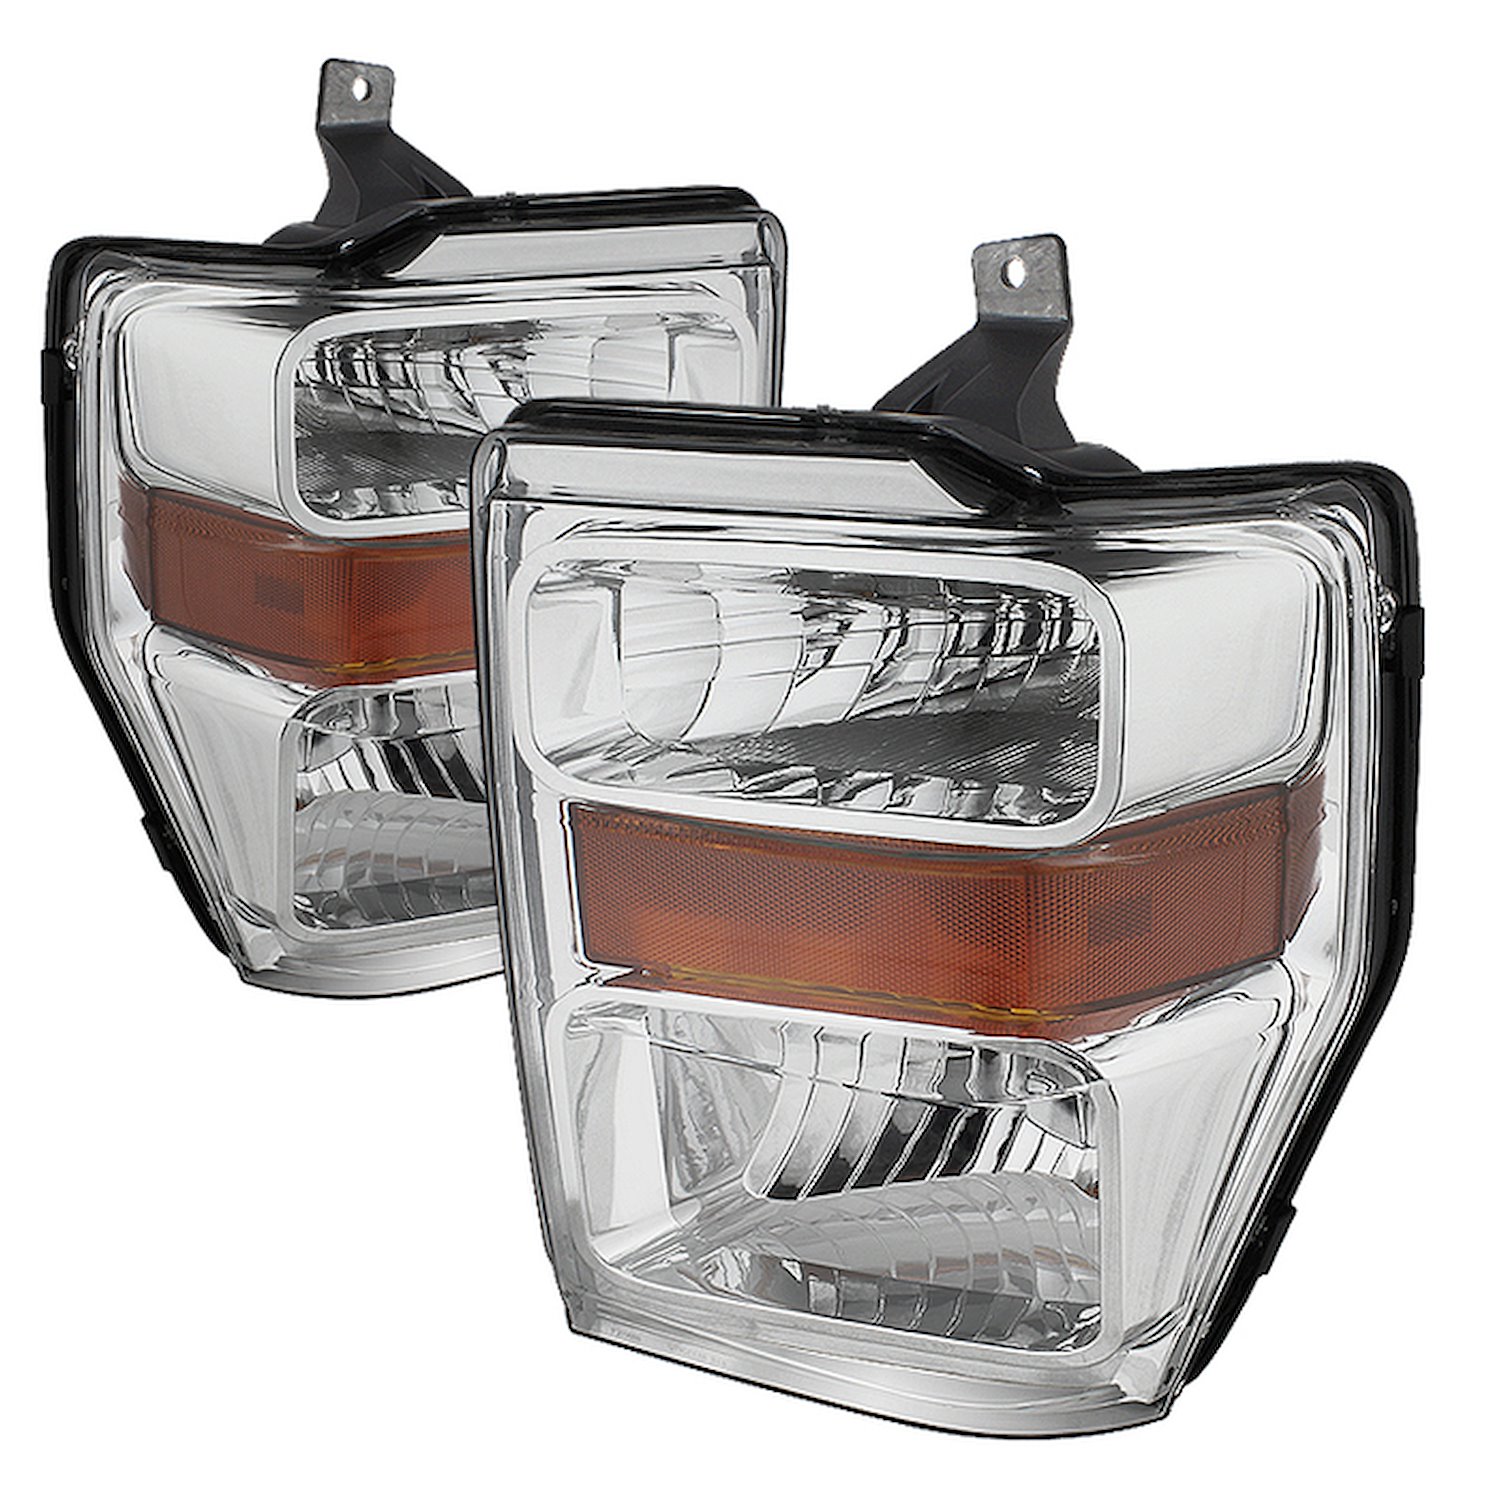 xTune OEM Style Crystal Headlights 2008-2010 Ford F250/350/450